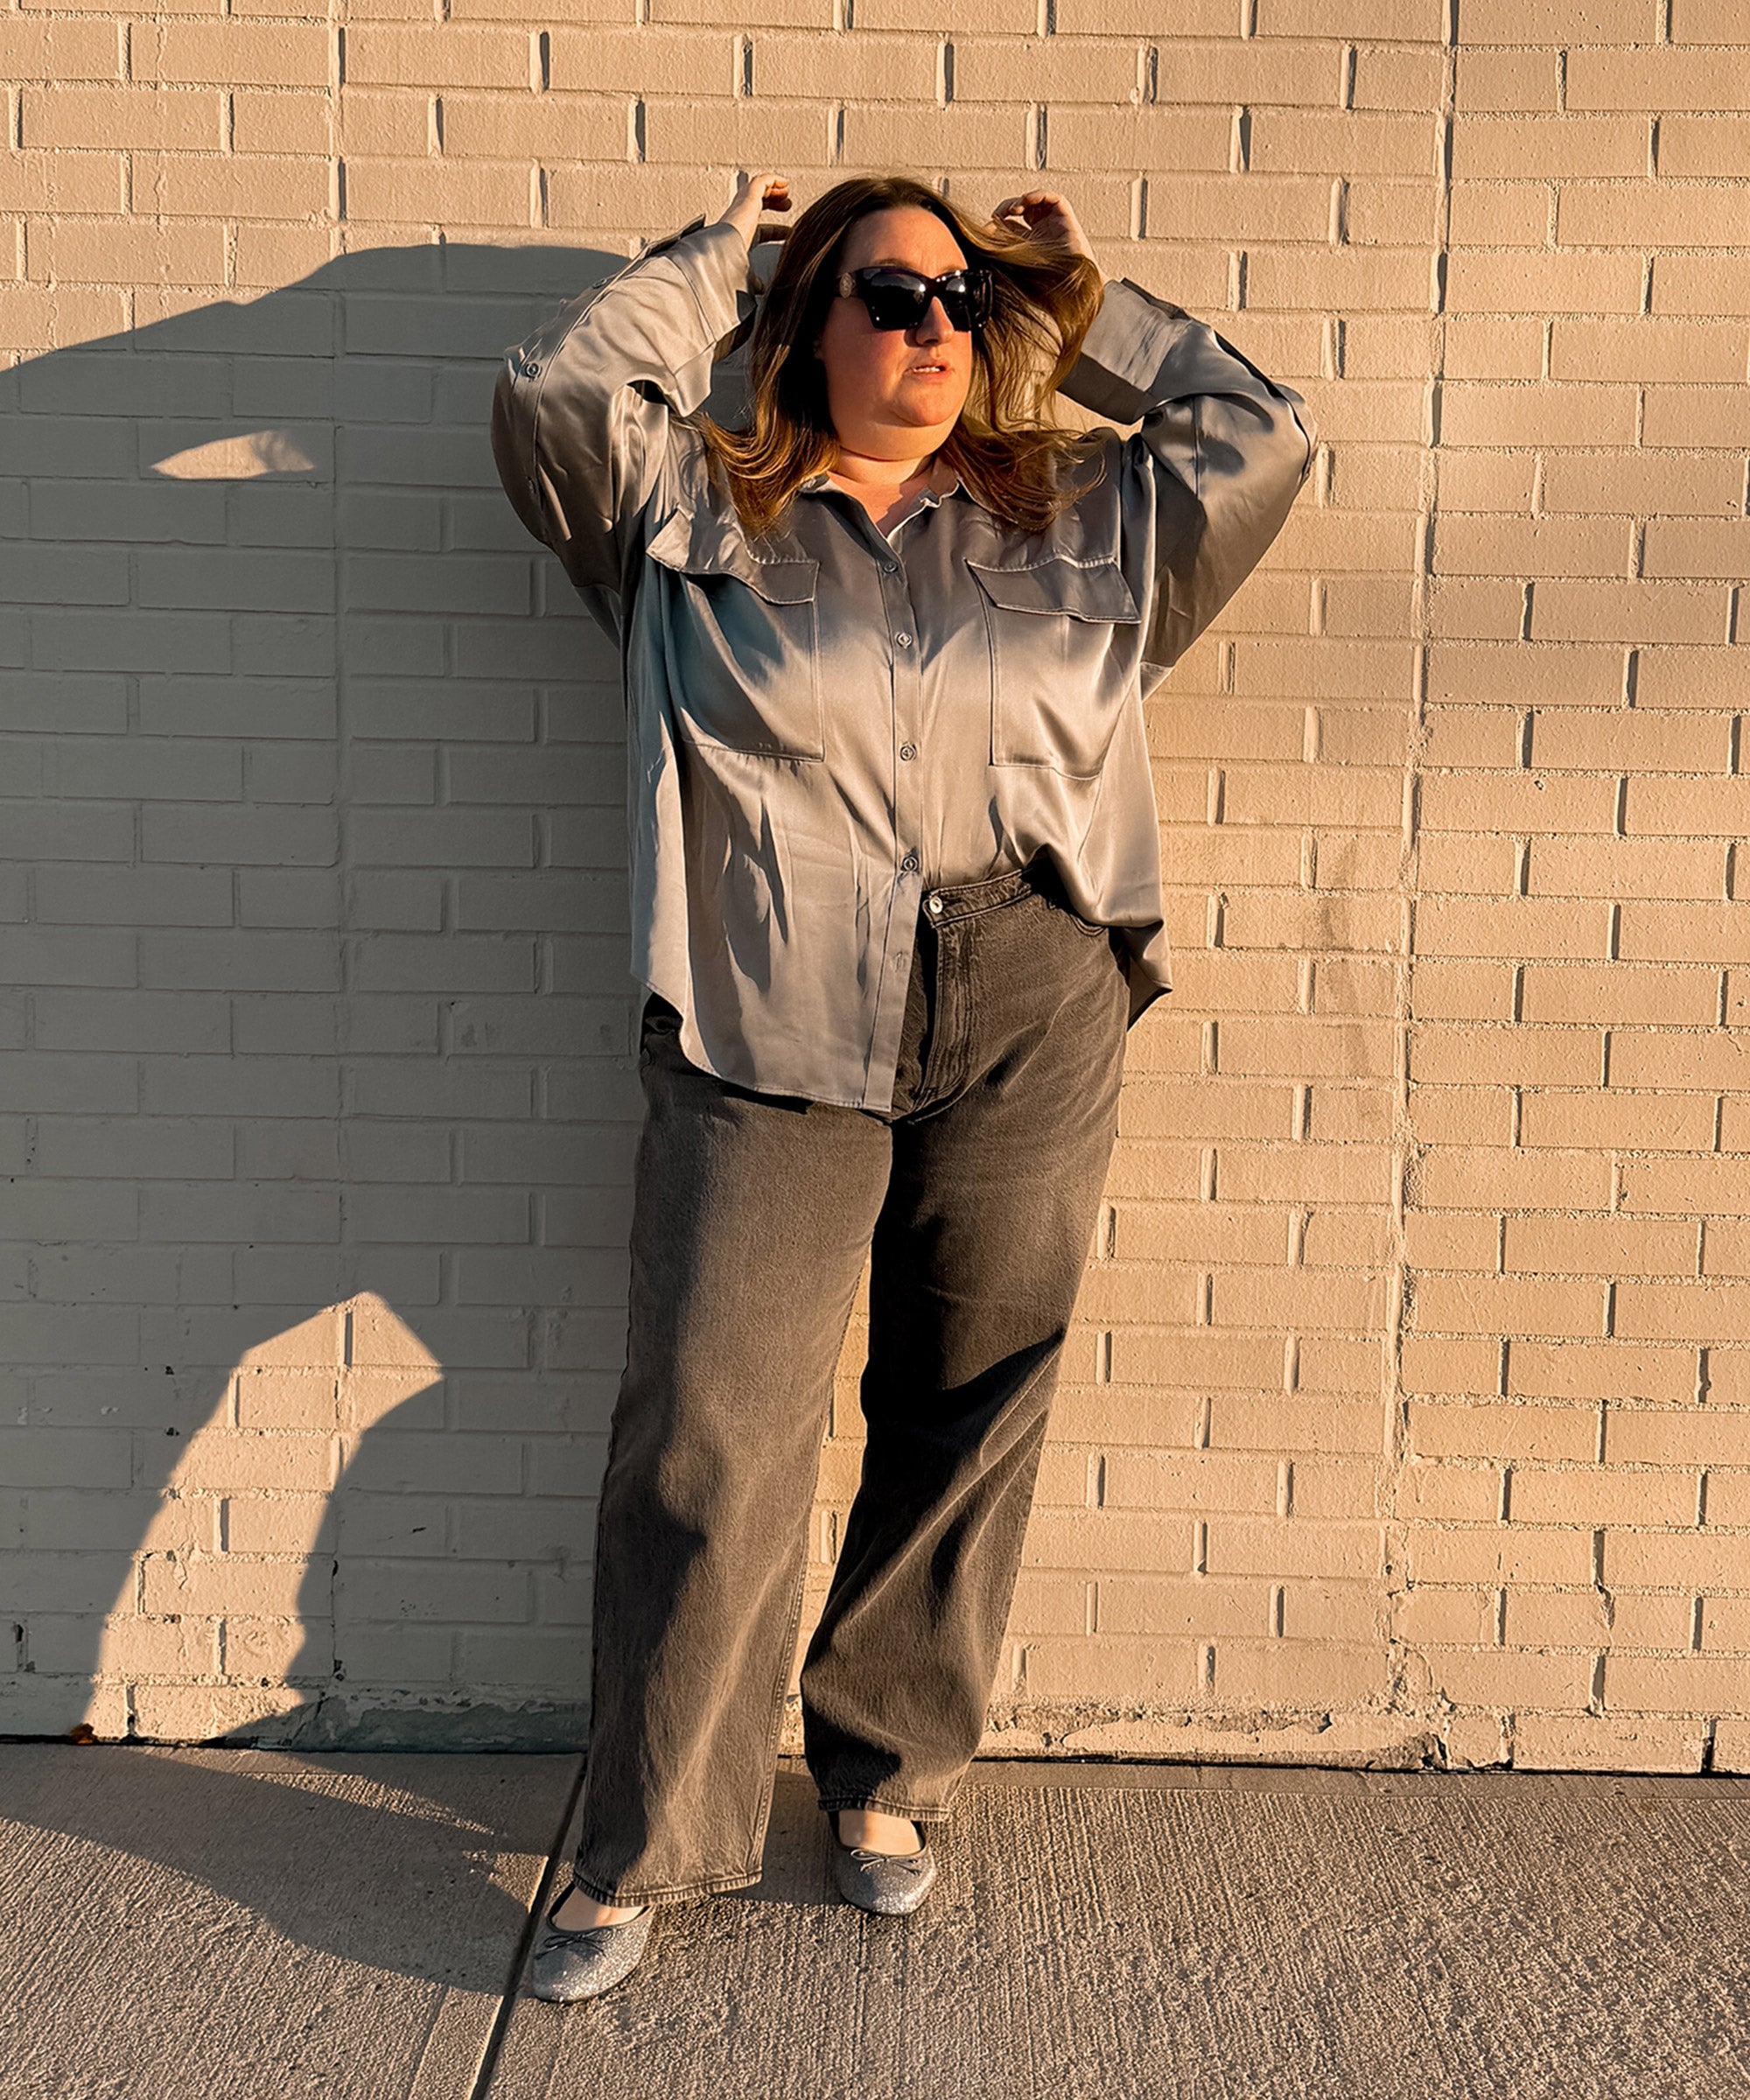 8 Bloggers Share Their Favorite Plus-Size Jeans